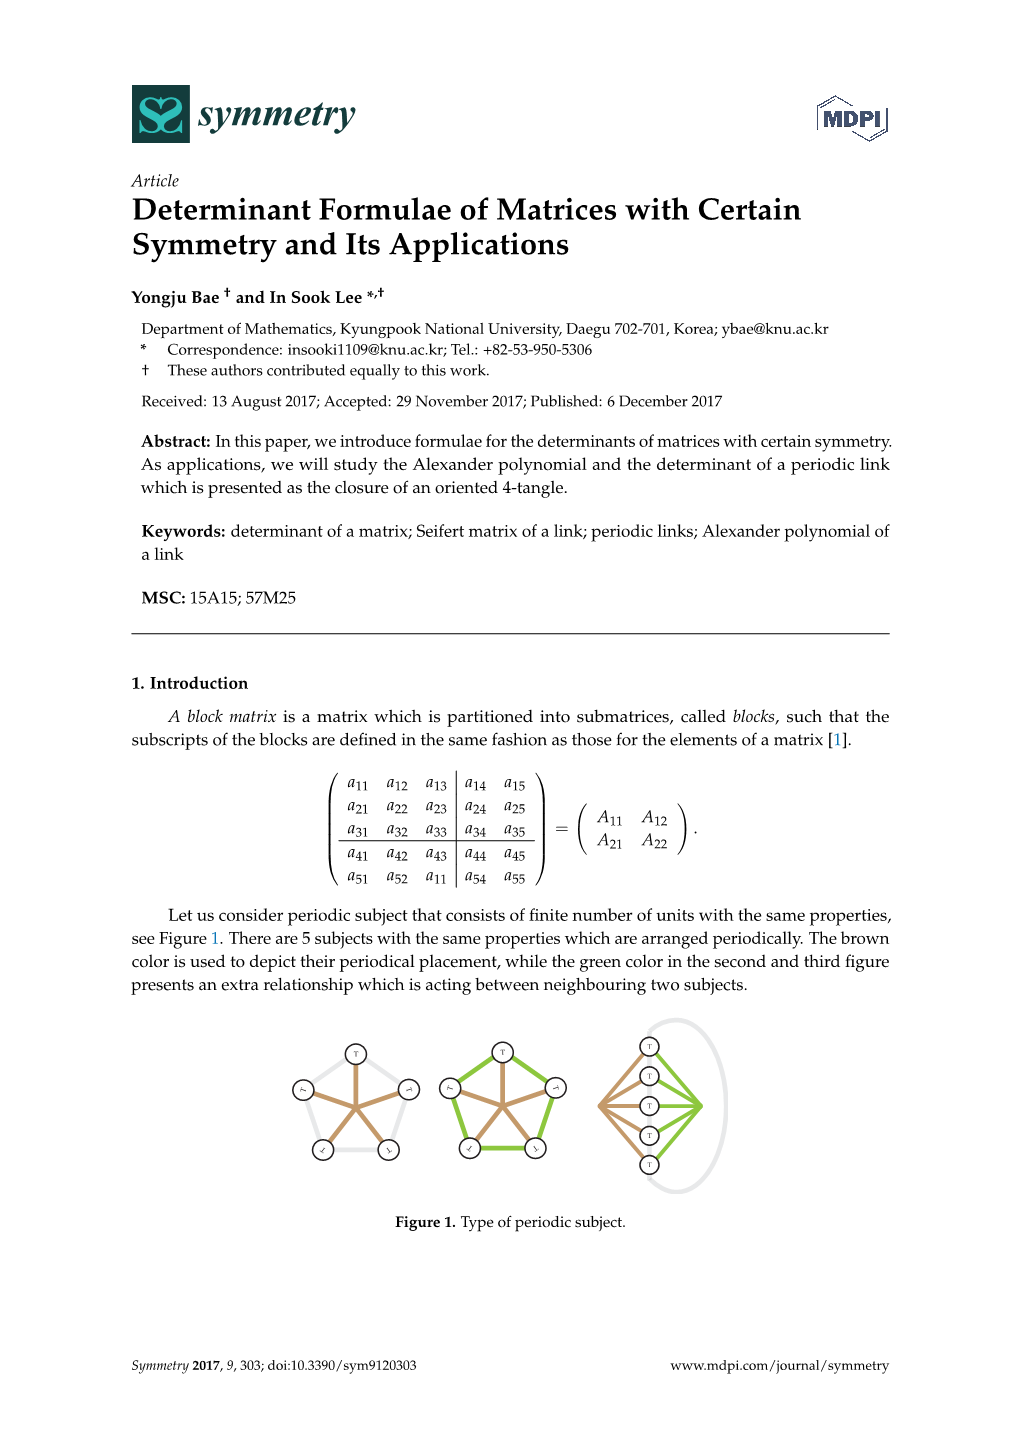 Determinant Formulae of Matrices with Certain Symmetry and Its Applications